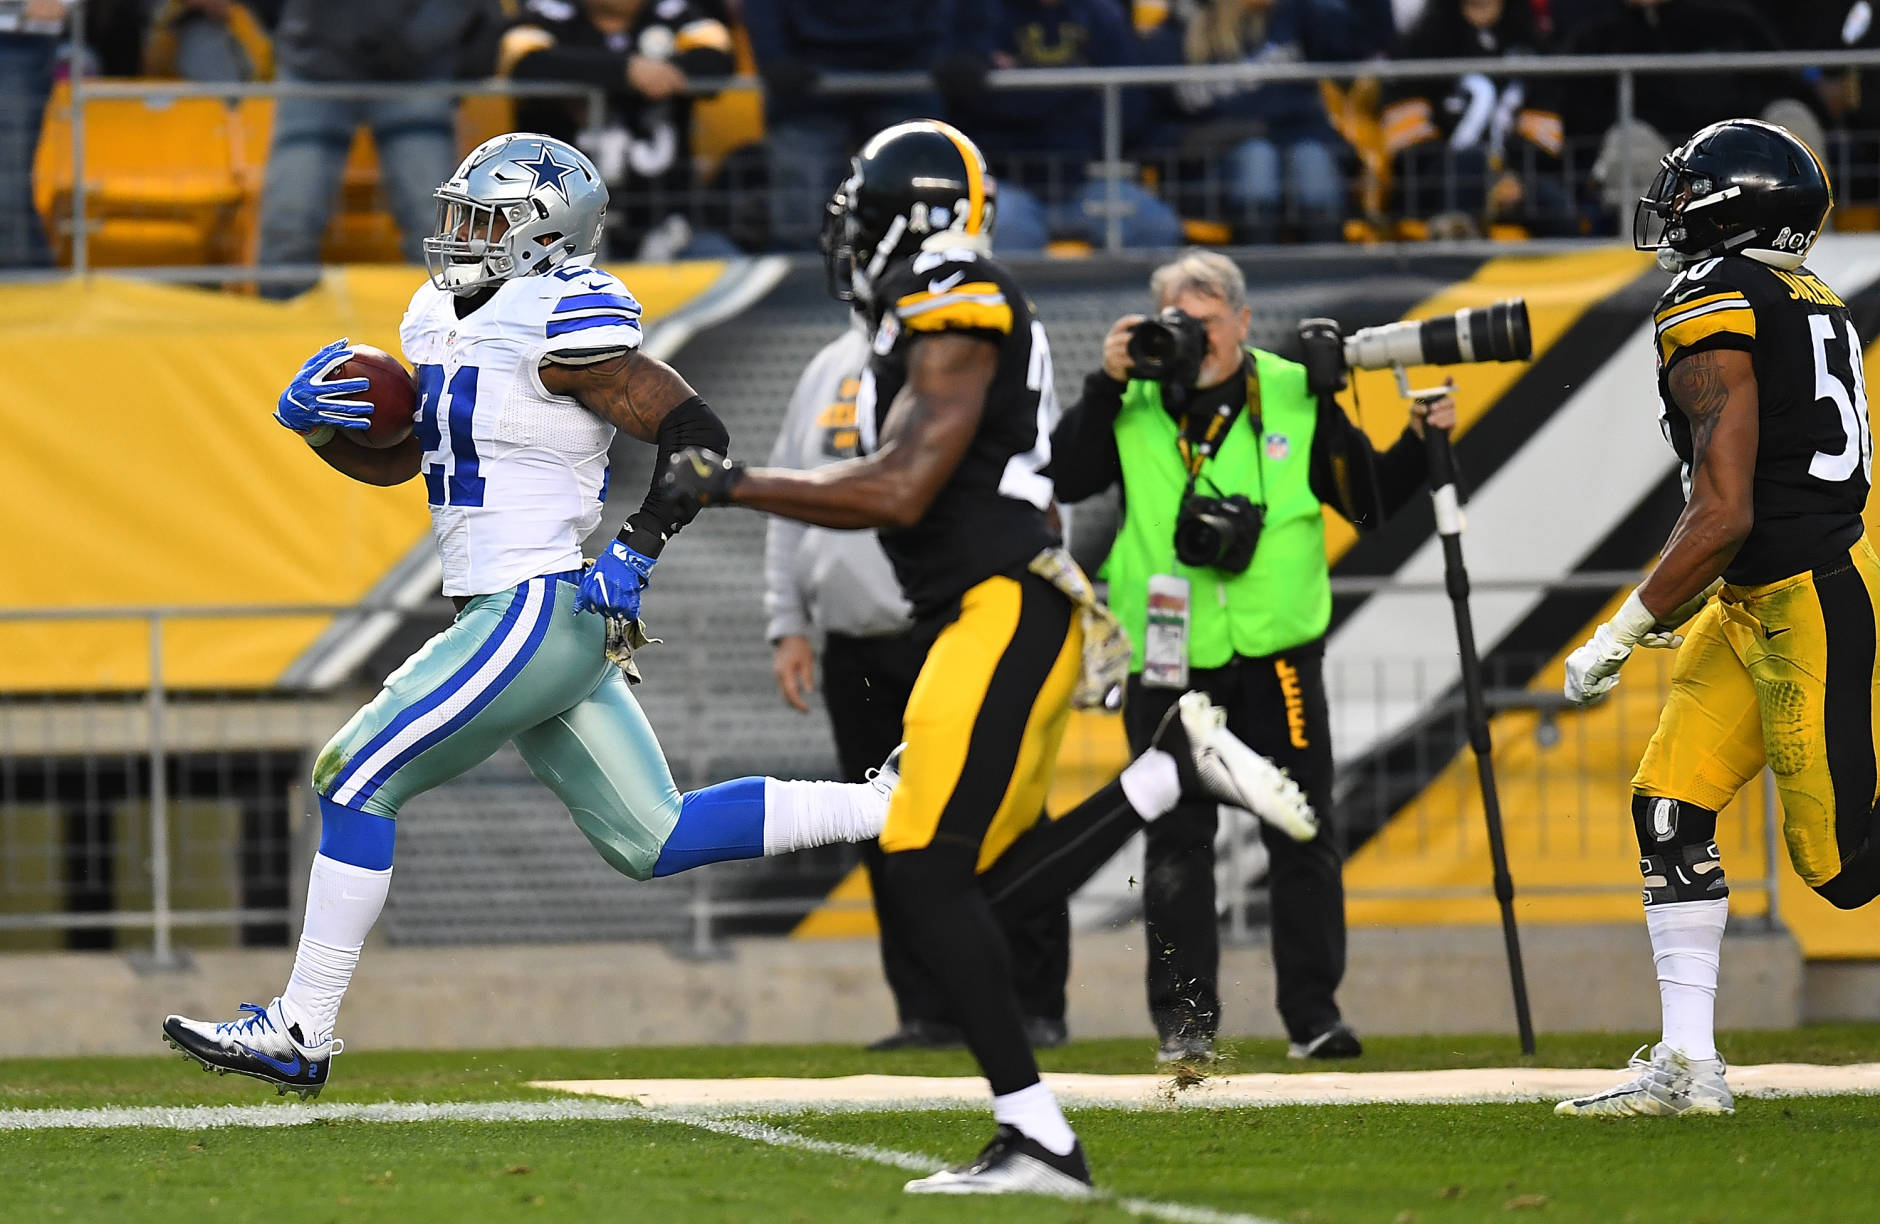 PITTSBURGH, PA - NOVEMBER 13:  Ezekiel Elliott #21 of the Dallas Cowboys rushes towards the end zone past William Gay #22 of the Pittsburgh Steelers for an 83 yard touchdown reception in the first quarter during the game at Heinz Field on November 13, 2016 in Pittsburgh, Pennsylvania. (Photo by Joe Sargent/Getty Images)